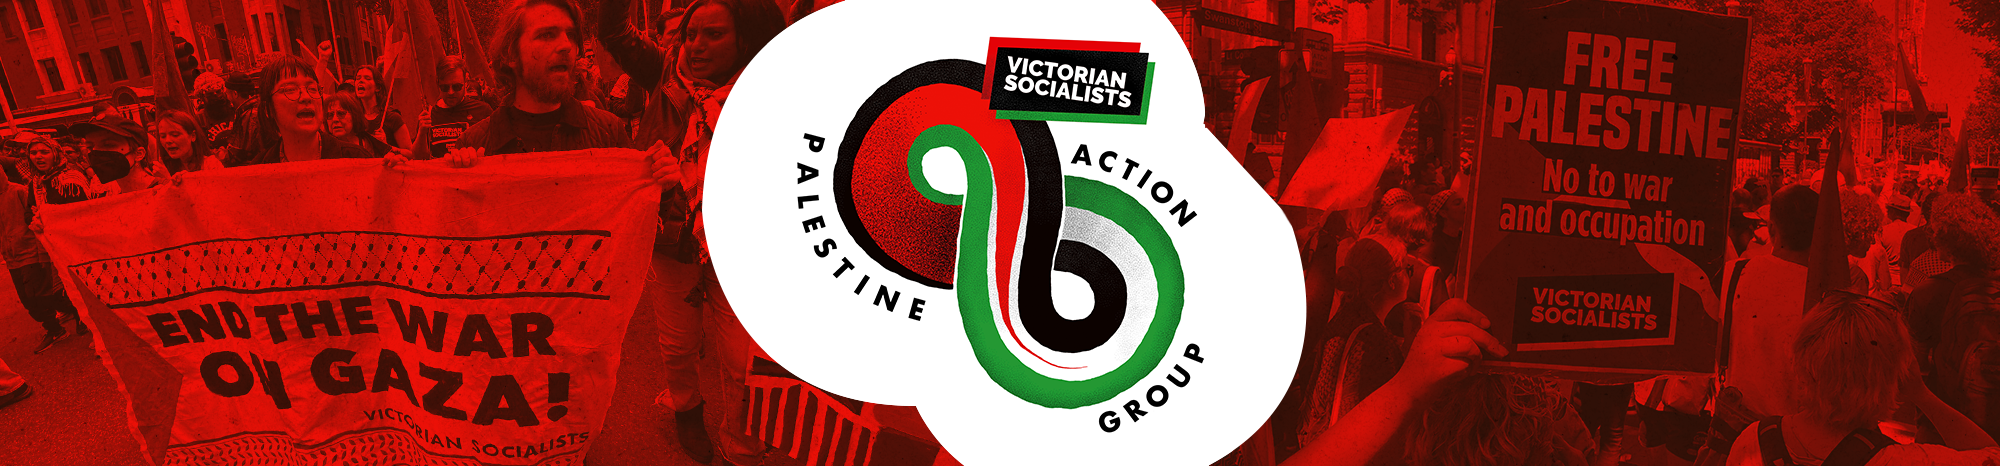 Victorian Socialists Palestine Action Group